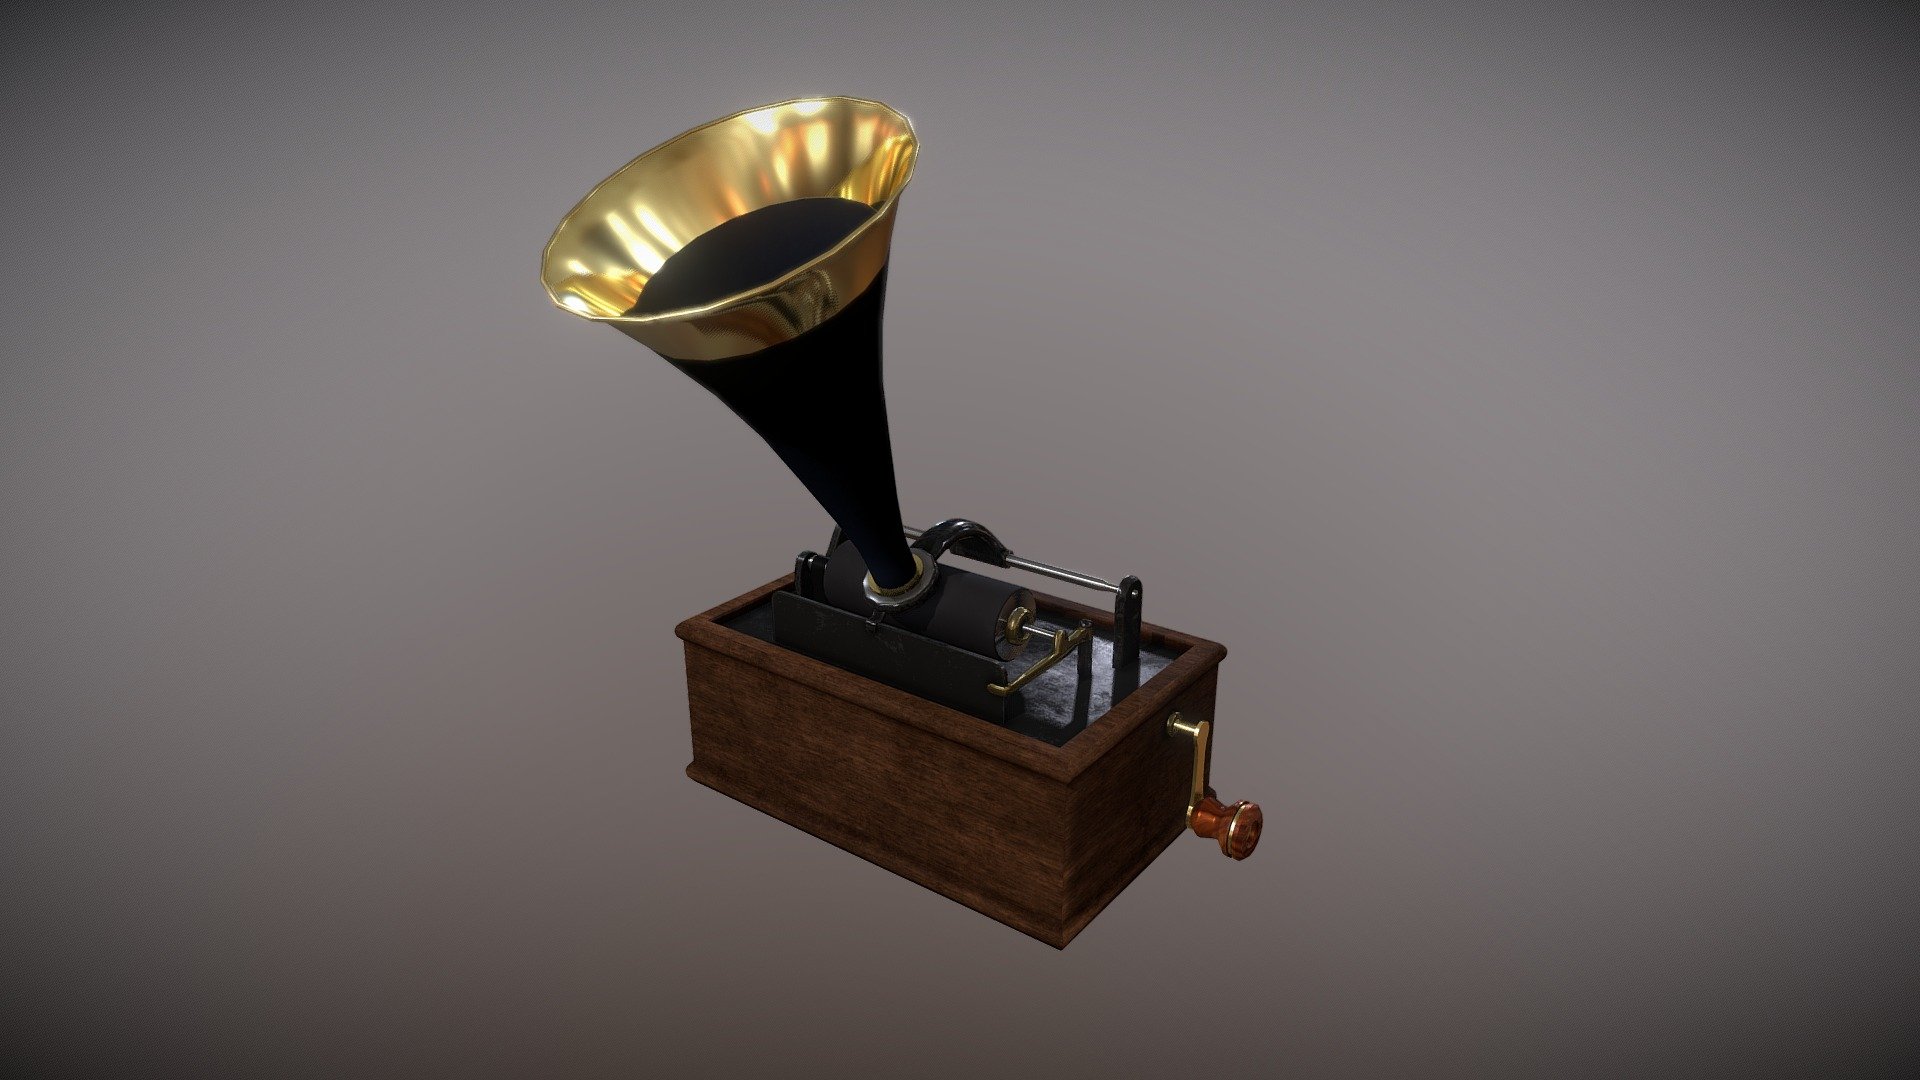 This cylinder phonograph was part of a puzzle in the VR escape room game, Cliffstone Manor 3d model